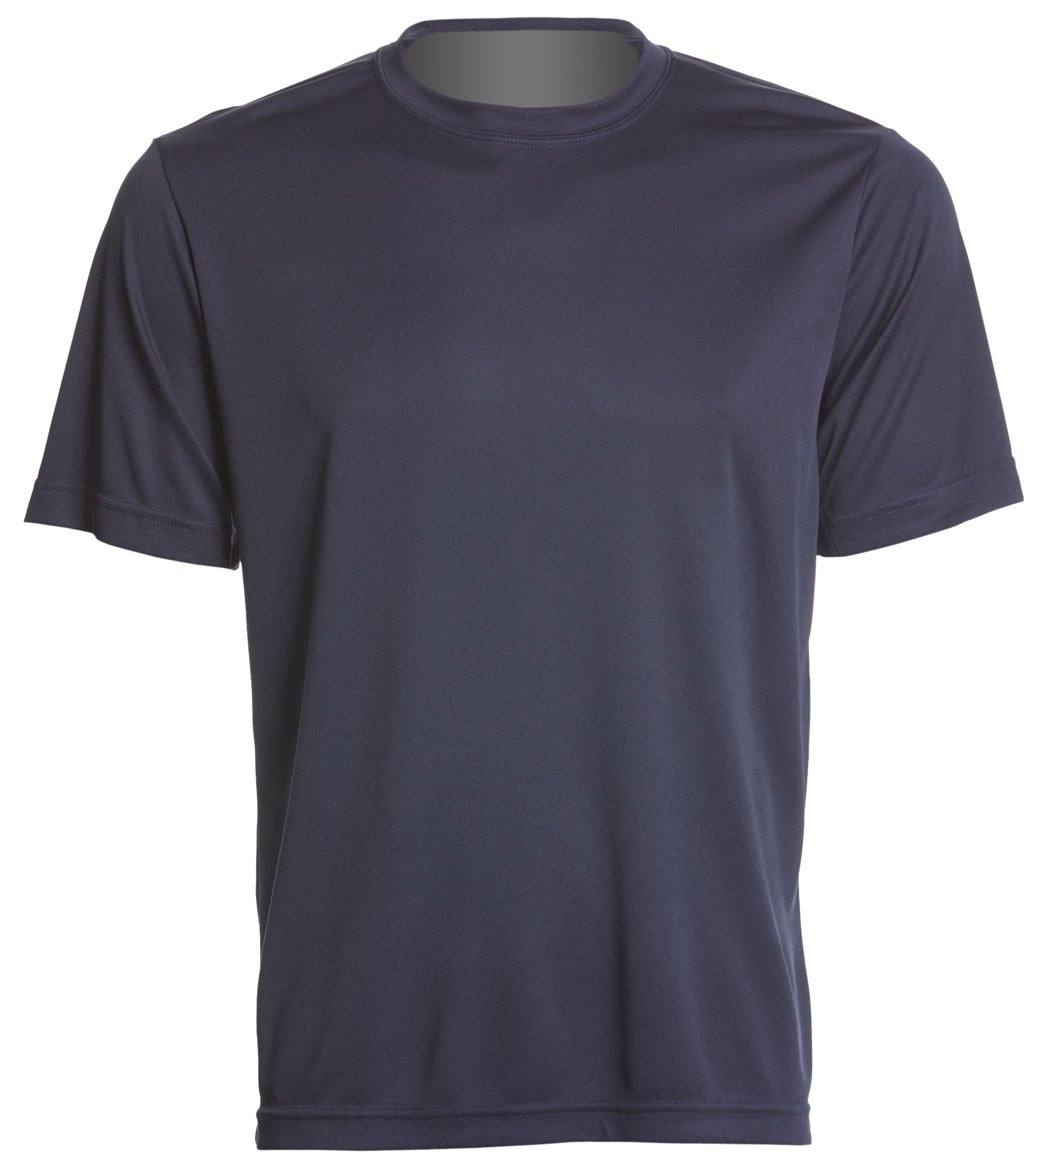 Men's Posicharge Competitortm Tee Shirt - True Navy X-Small Polyester - Swimoutlet.com